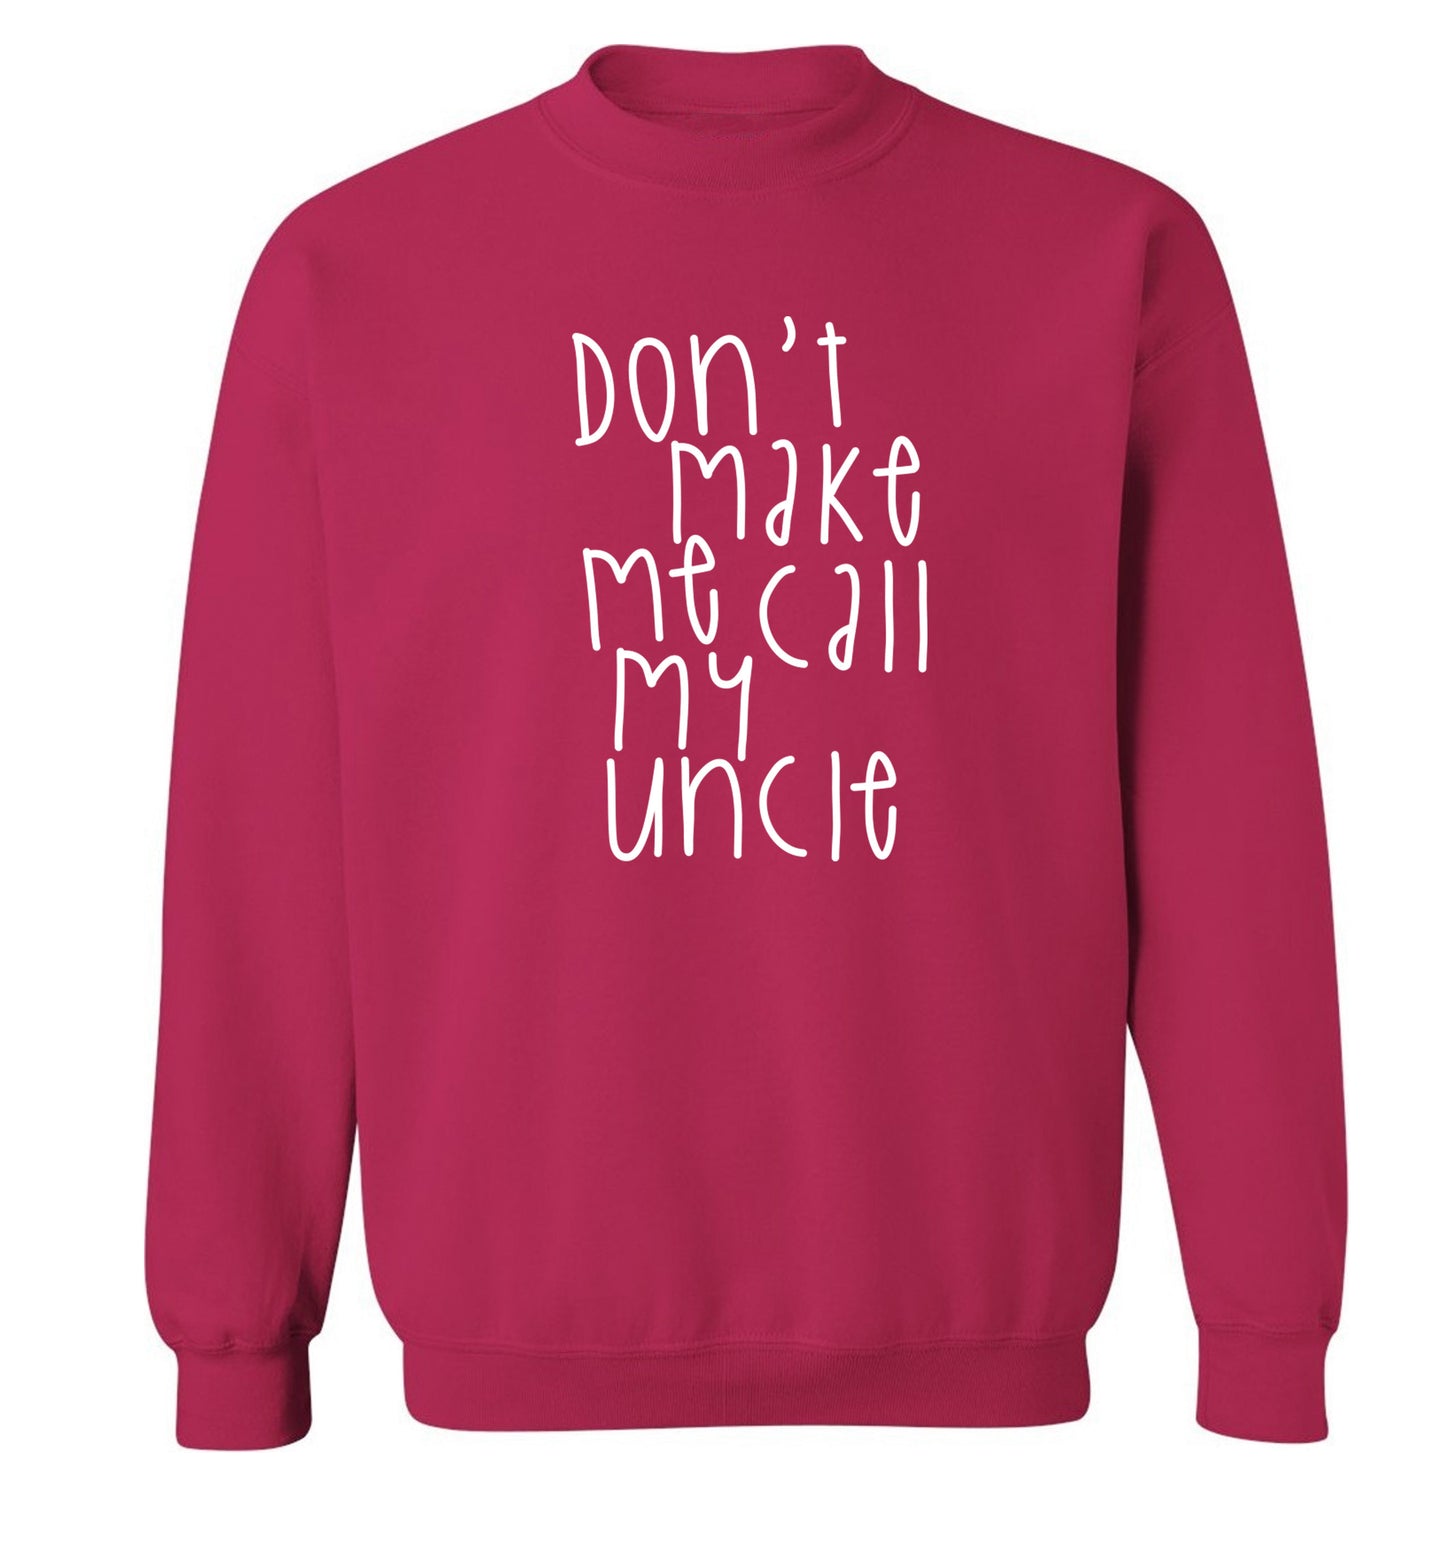 Don't make me call my uncle Adult's unisex pink Sweater 2XL